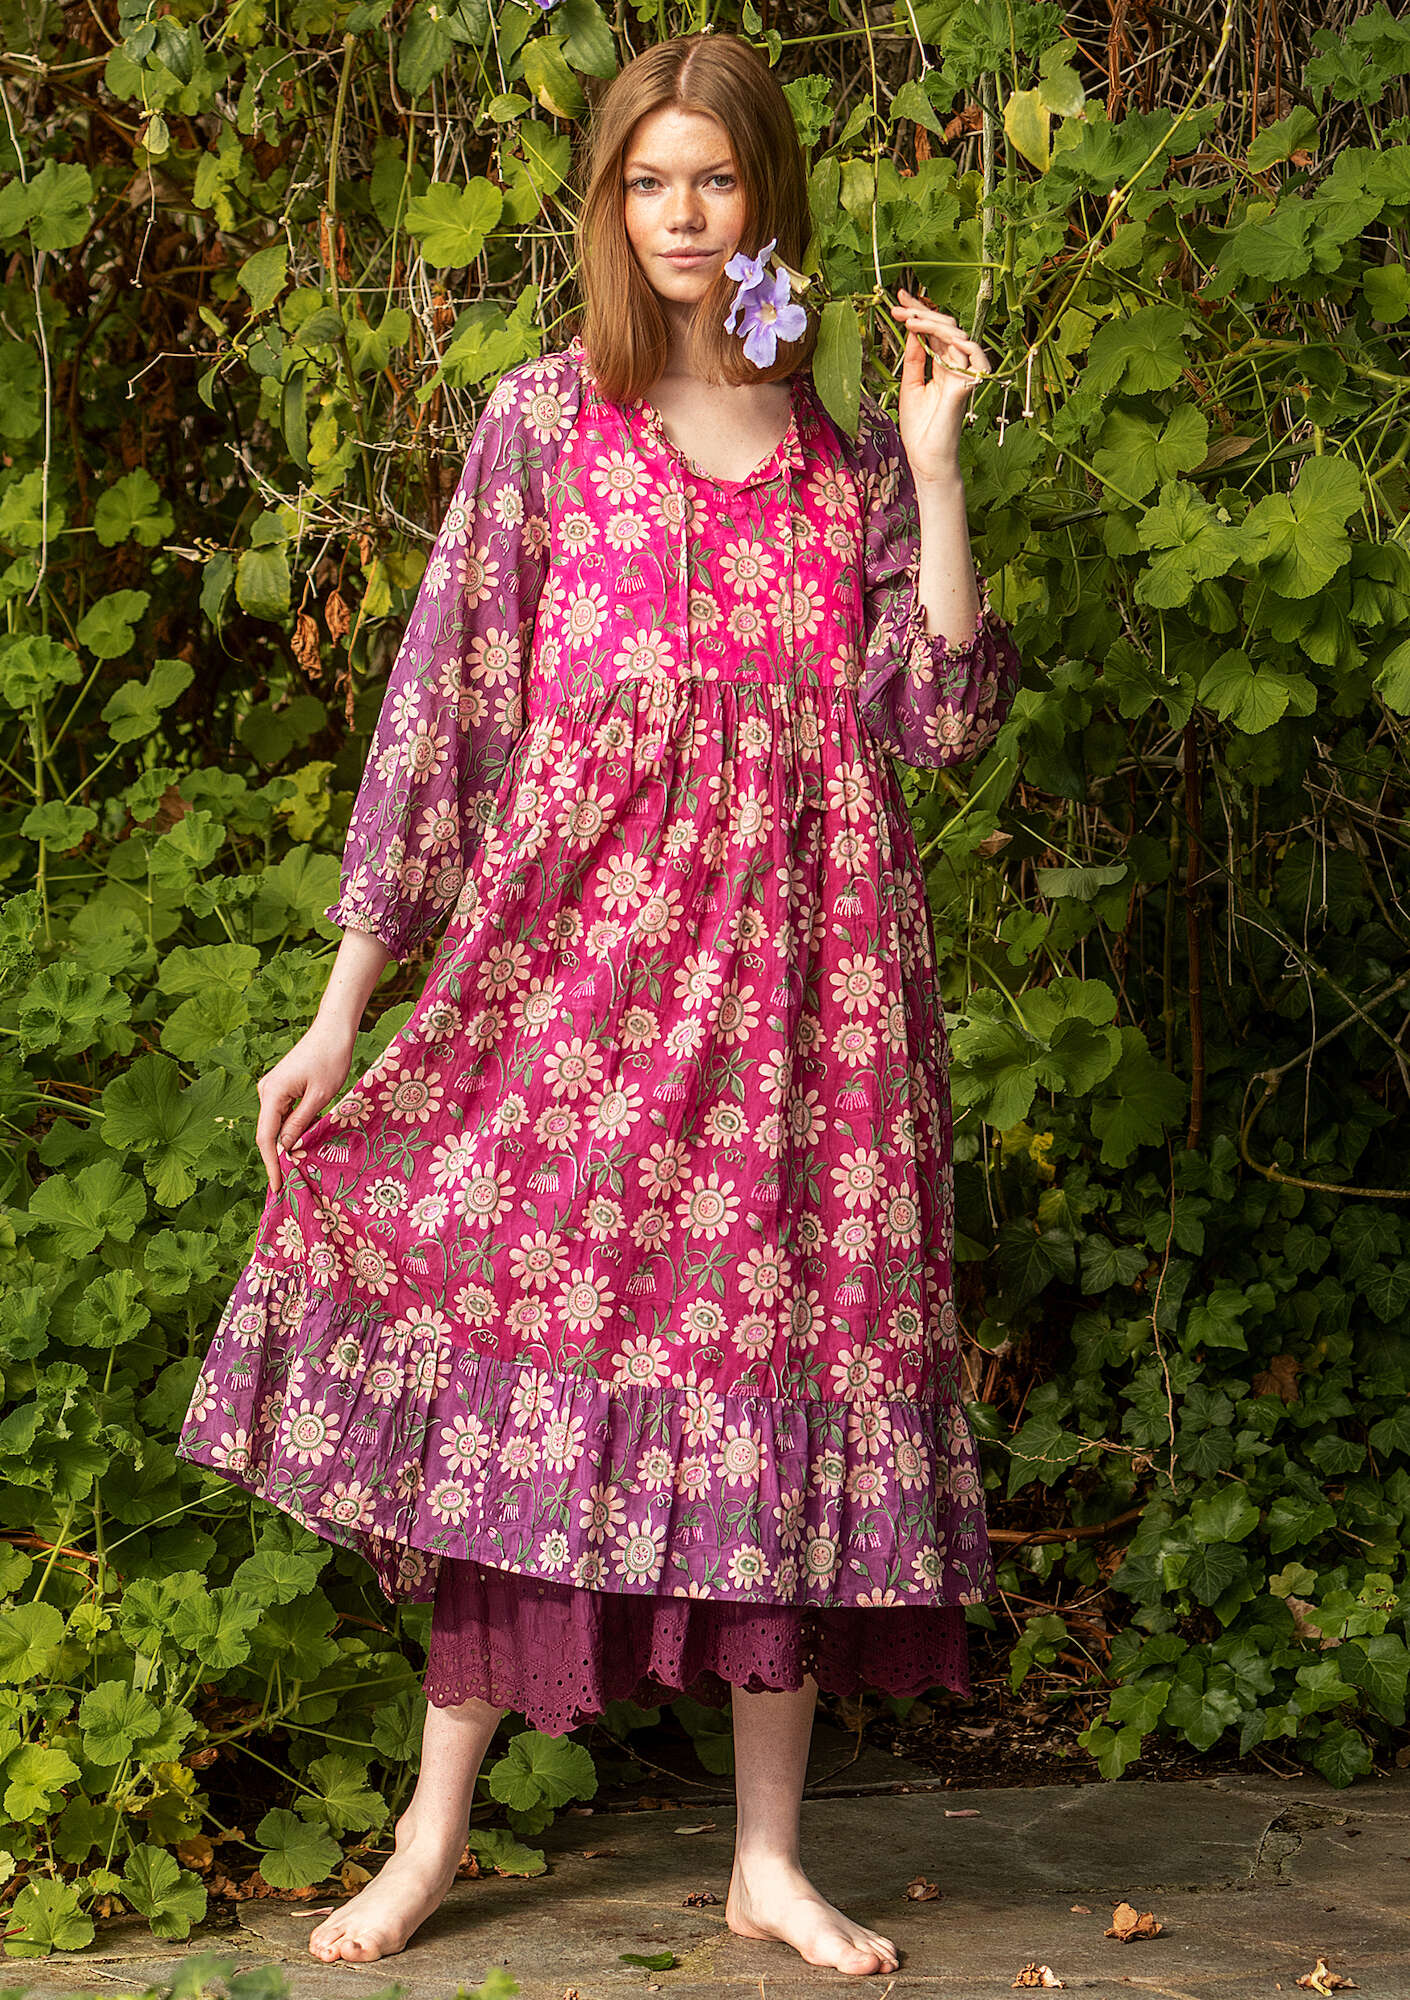 Robe Floria pink orchid